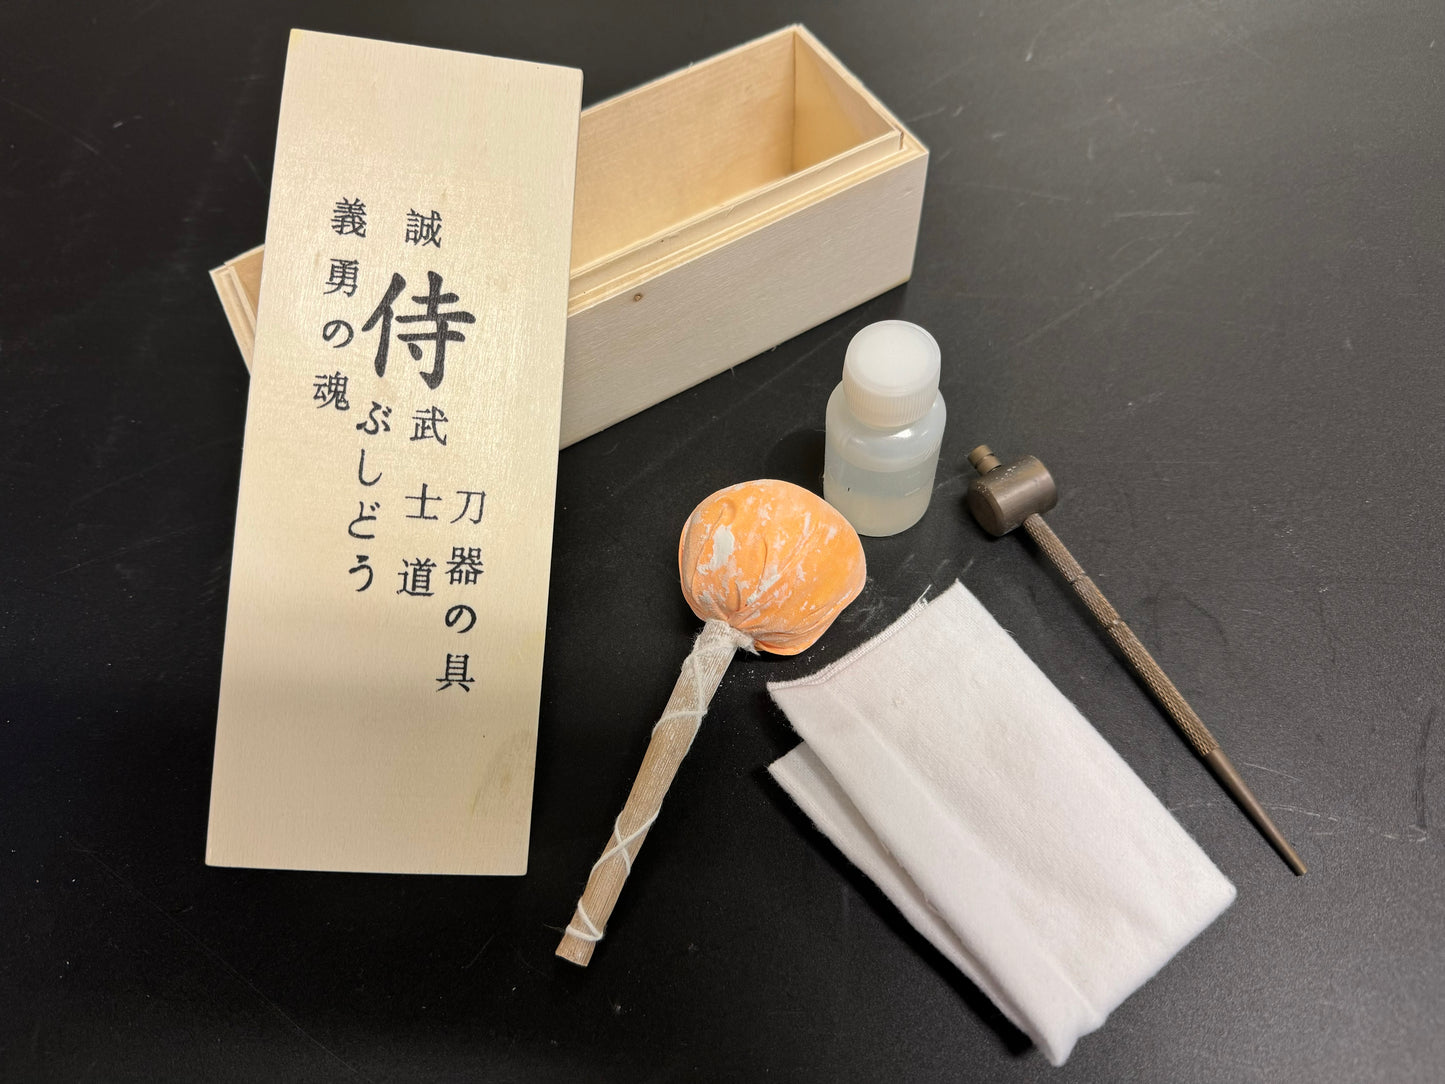 Sword Cleaning and Maintenance Kit